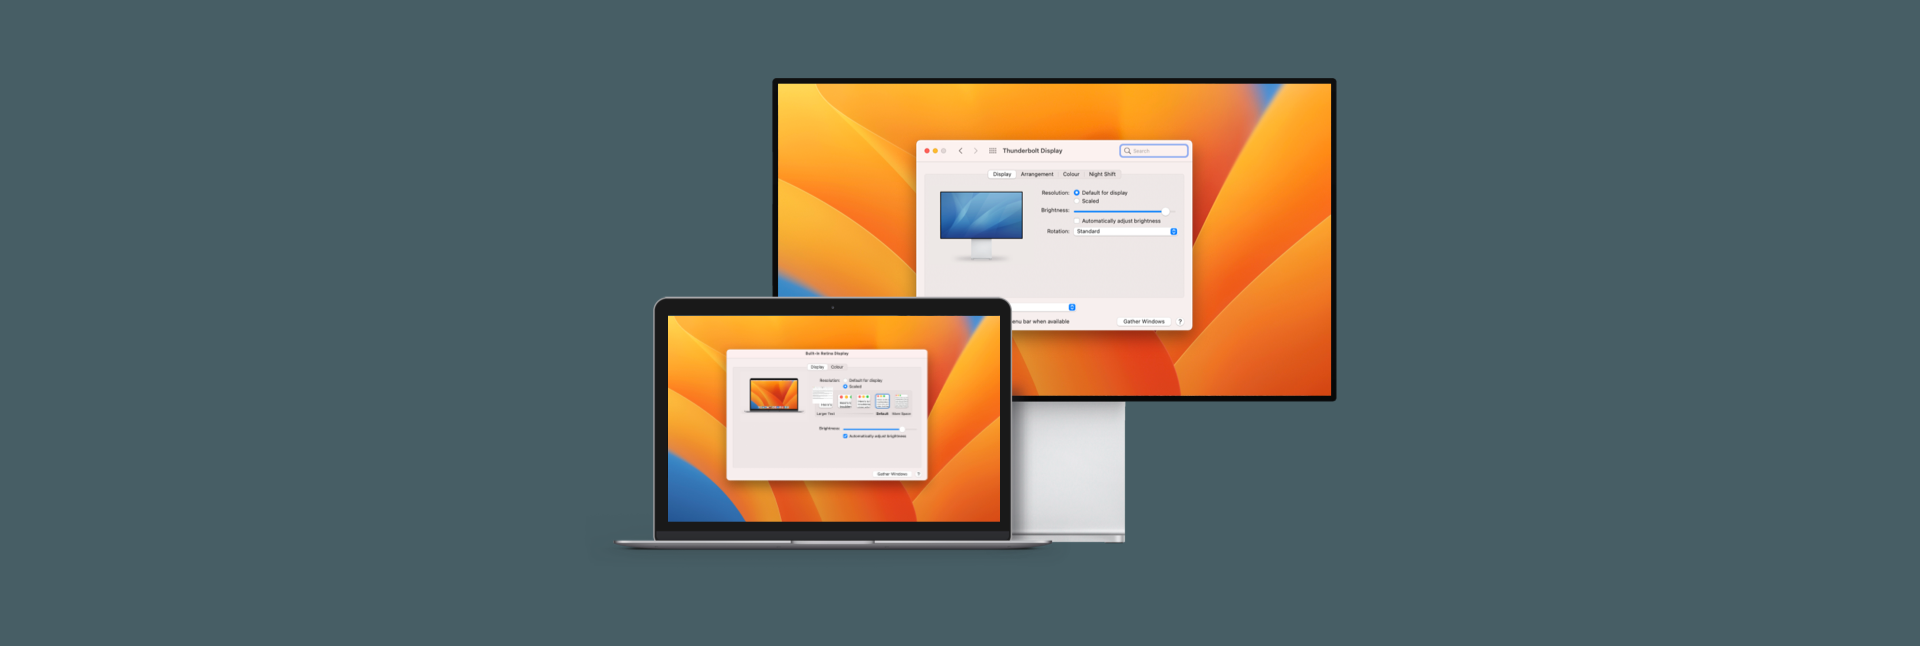 How to Connect a MacBook Air to a Monitor: Complete Guide